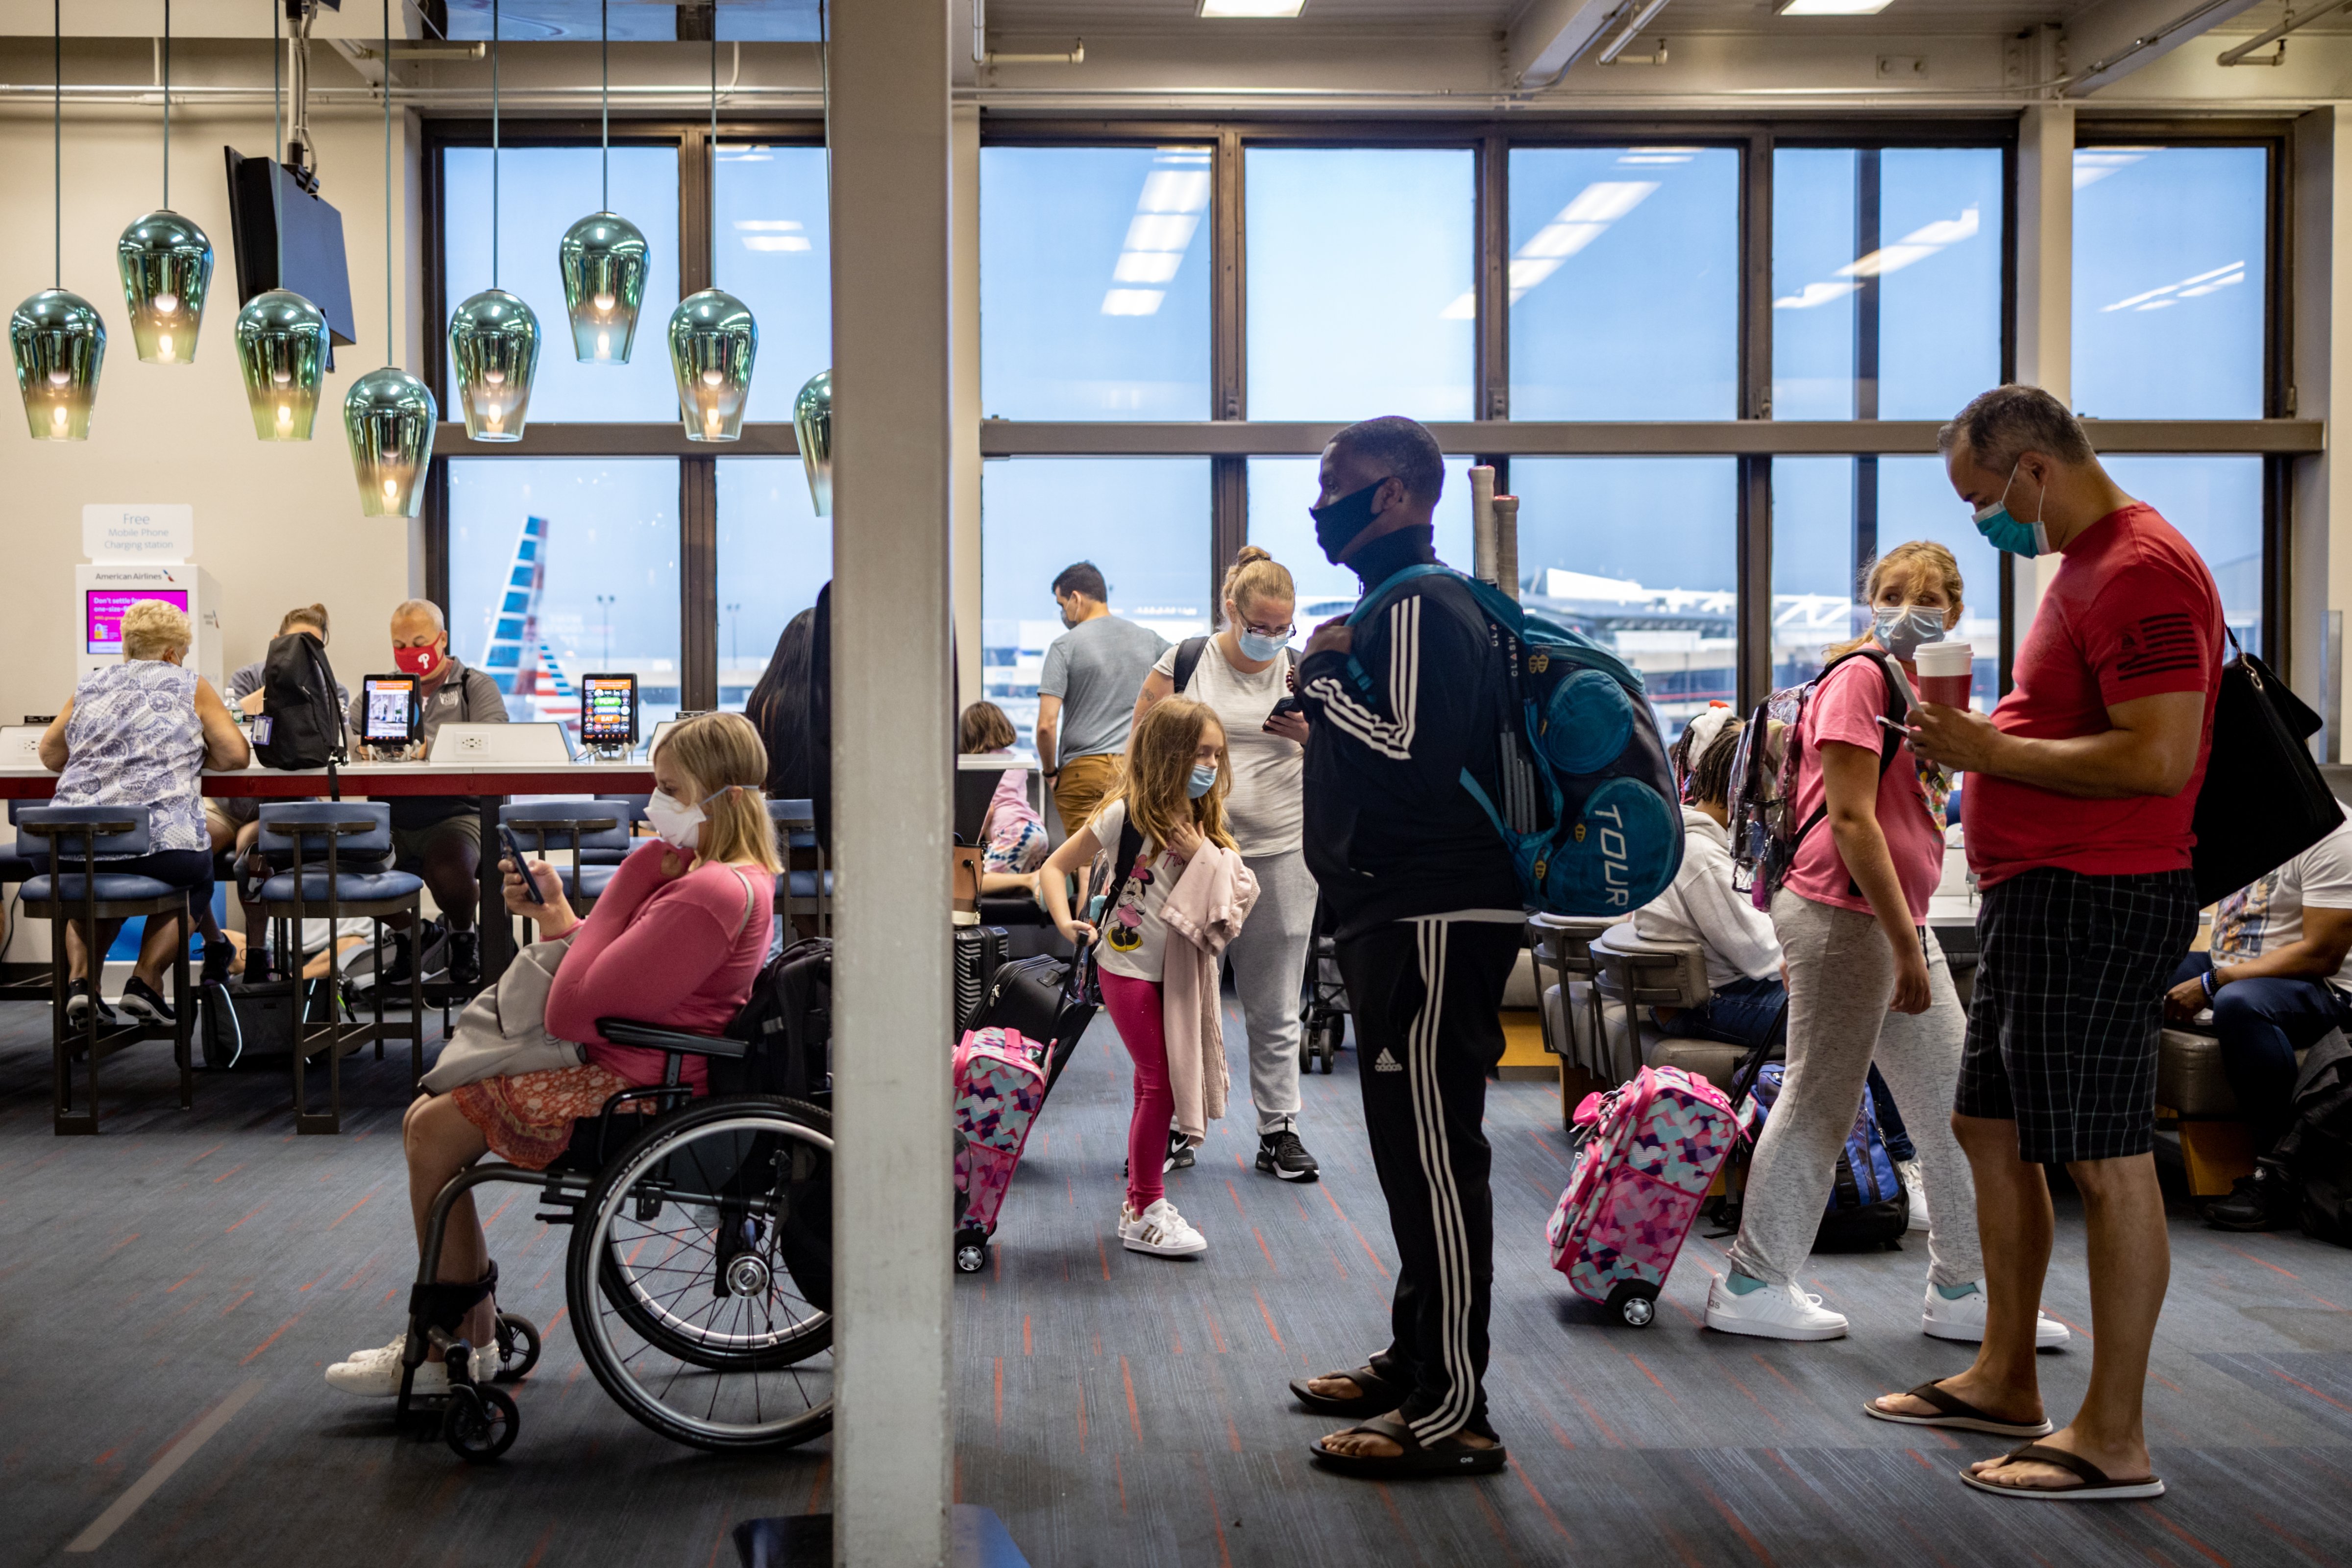 Travelers wait to board a flight at Philadelphia International Airport on Aug. 6, 2021. (Hannah Beier—Bloomberg/Getty Images)